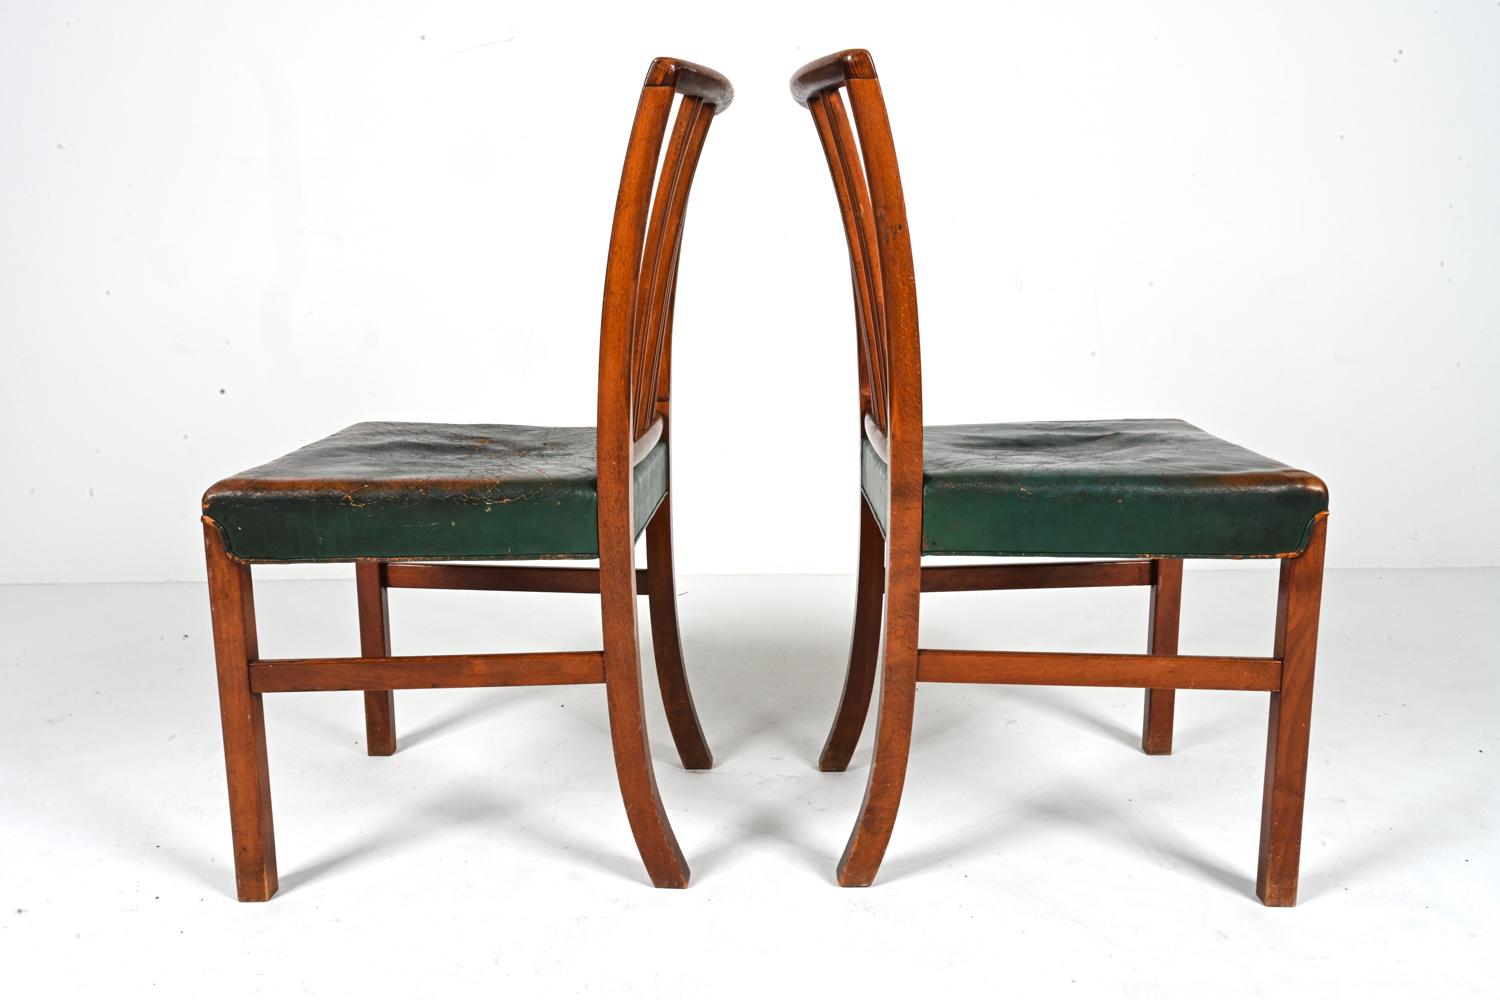 '12' Rare Model 1675B Dining Chairs by Ole Wanscher Fritz Hansen, c. 1940's For Sale 8